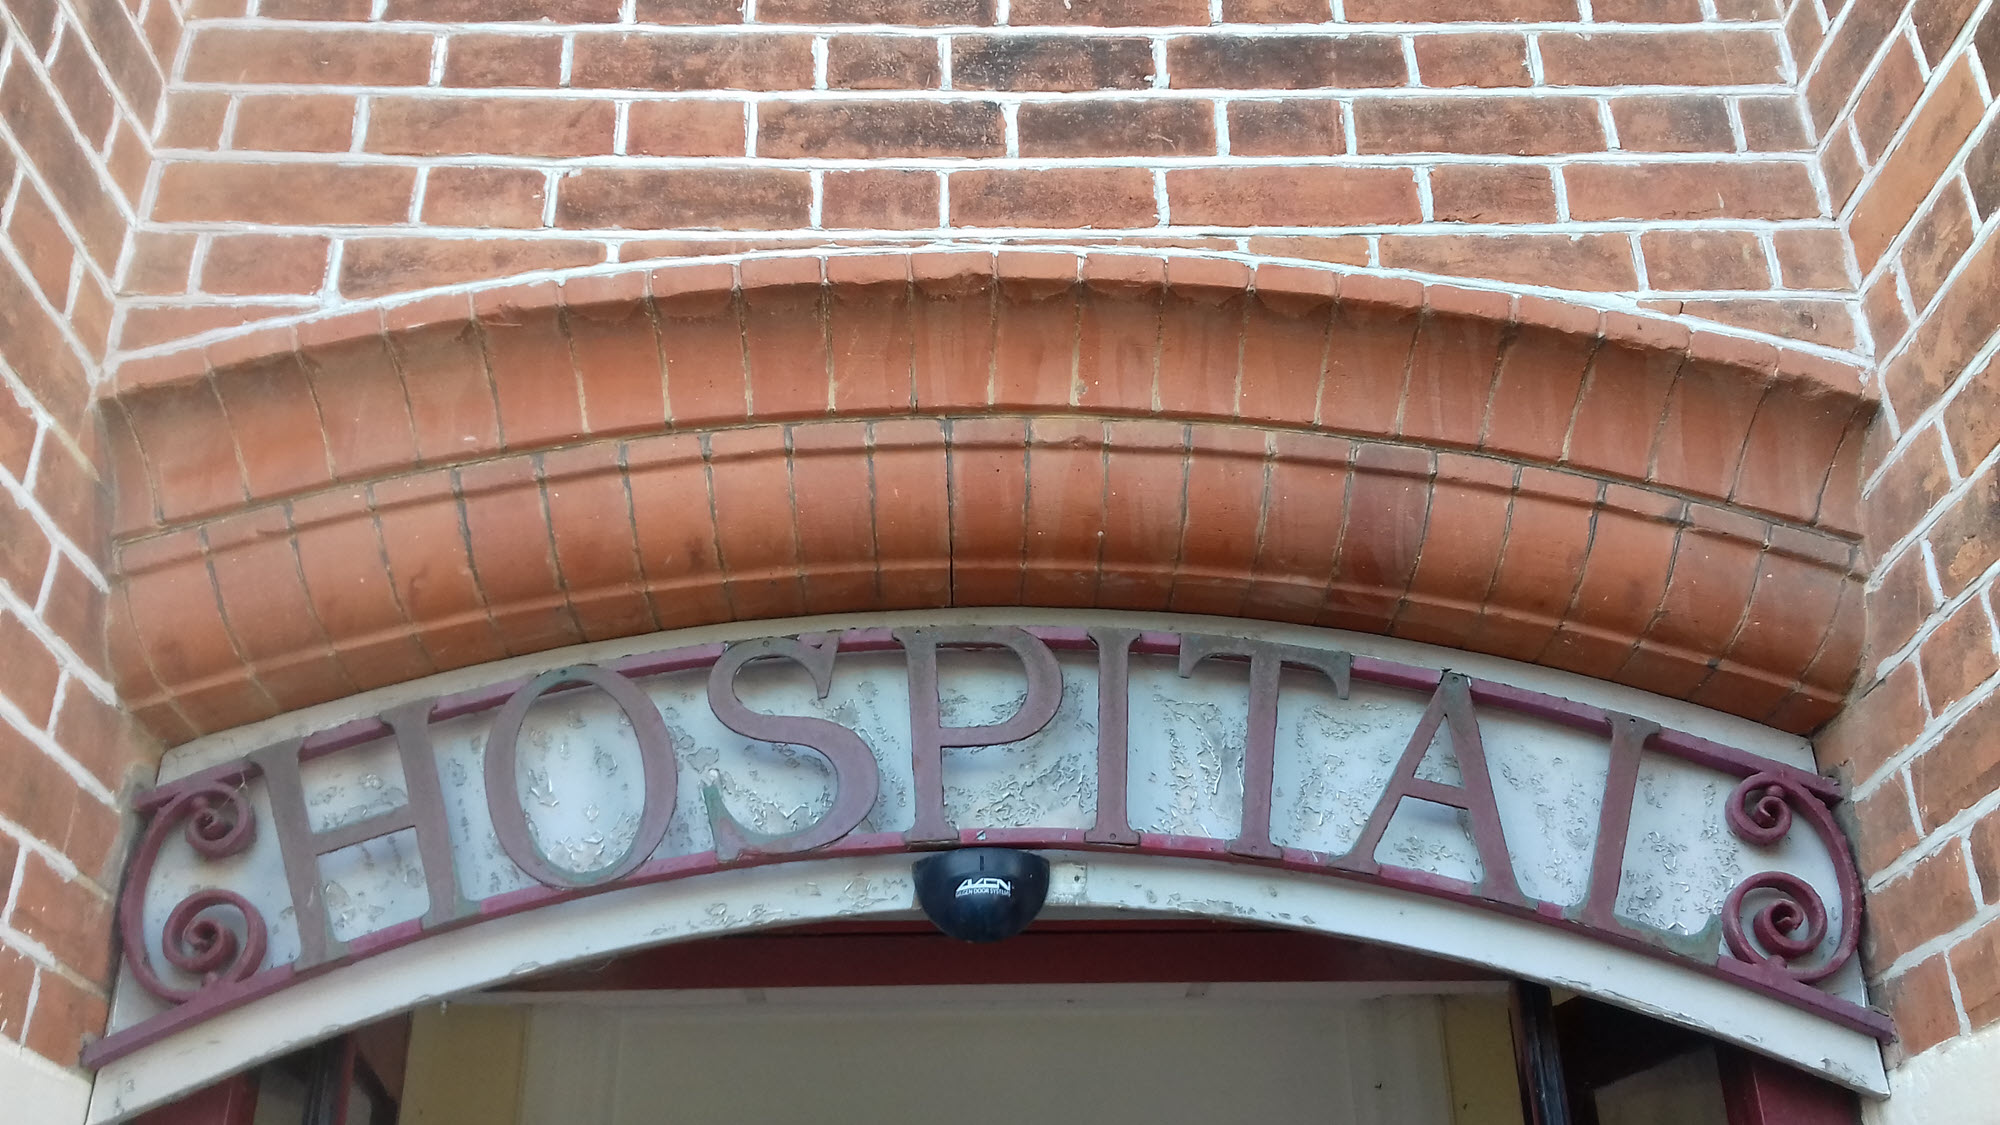 Original hospital sign over the front door of the building